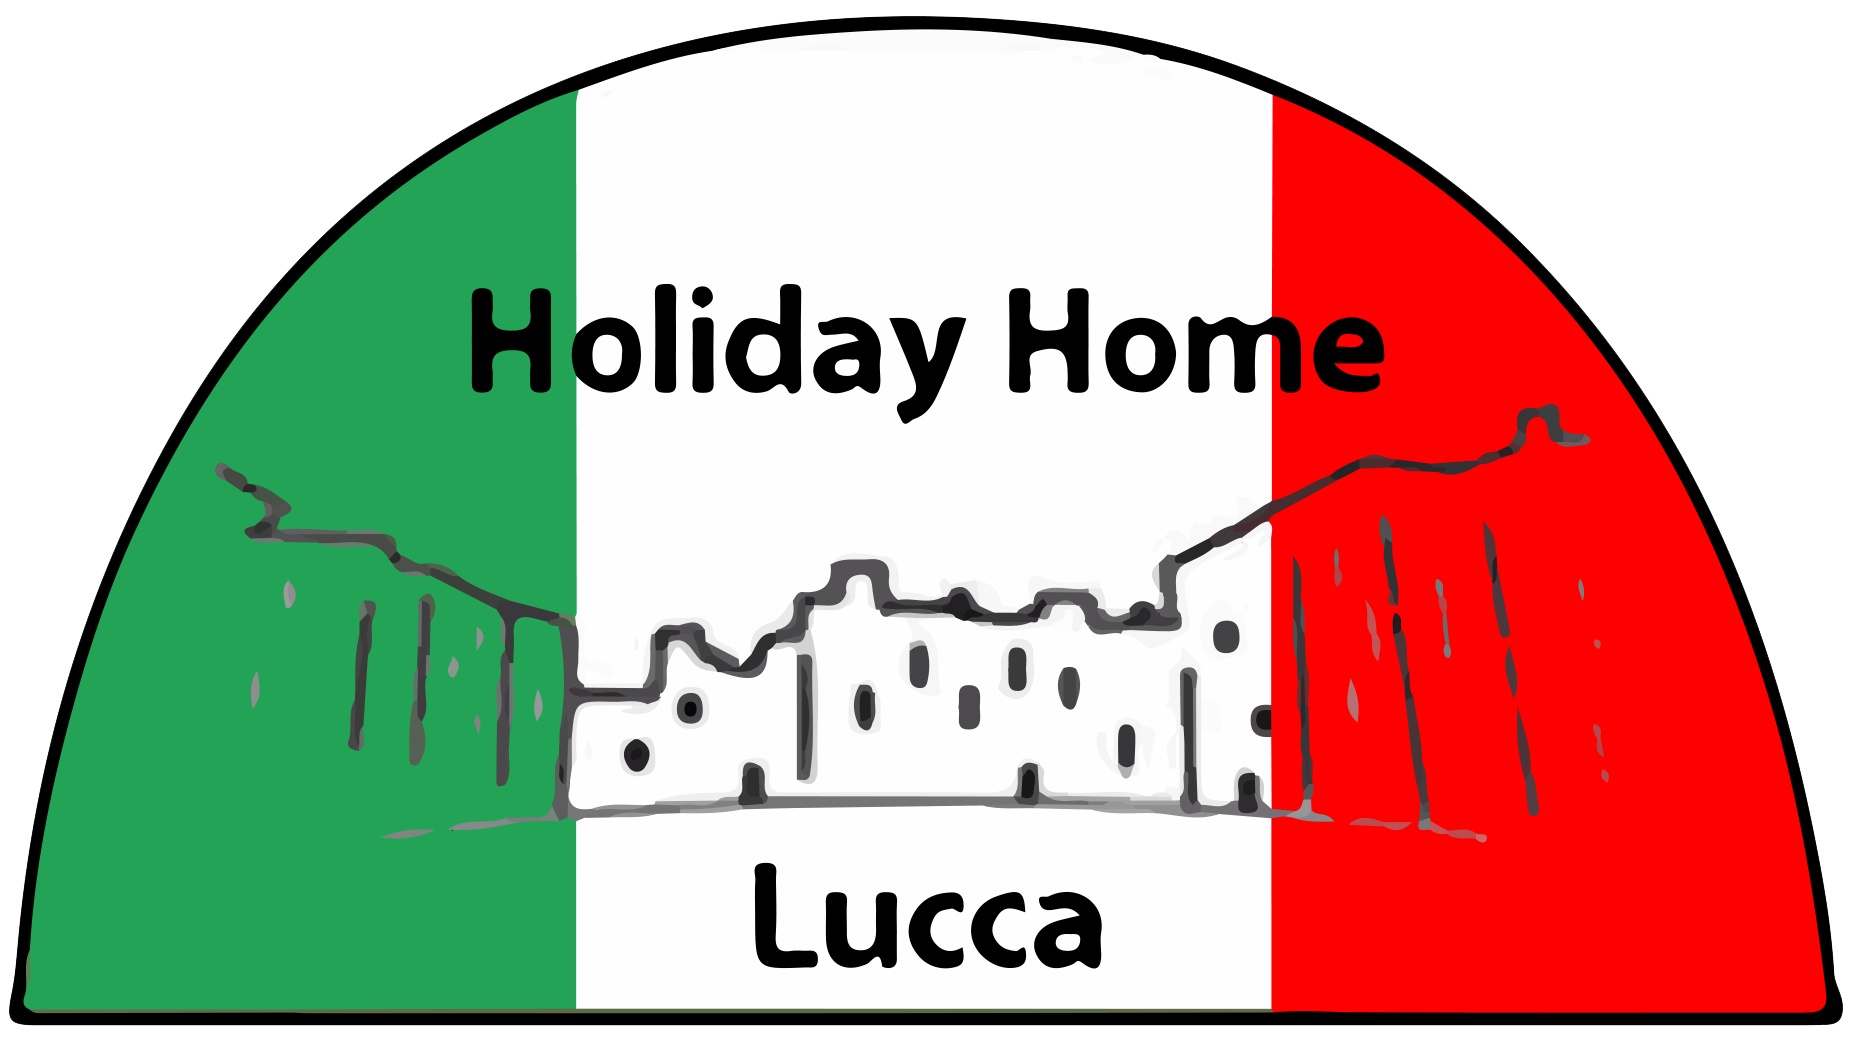 Holiday Home Lucca